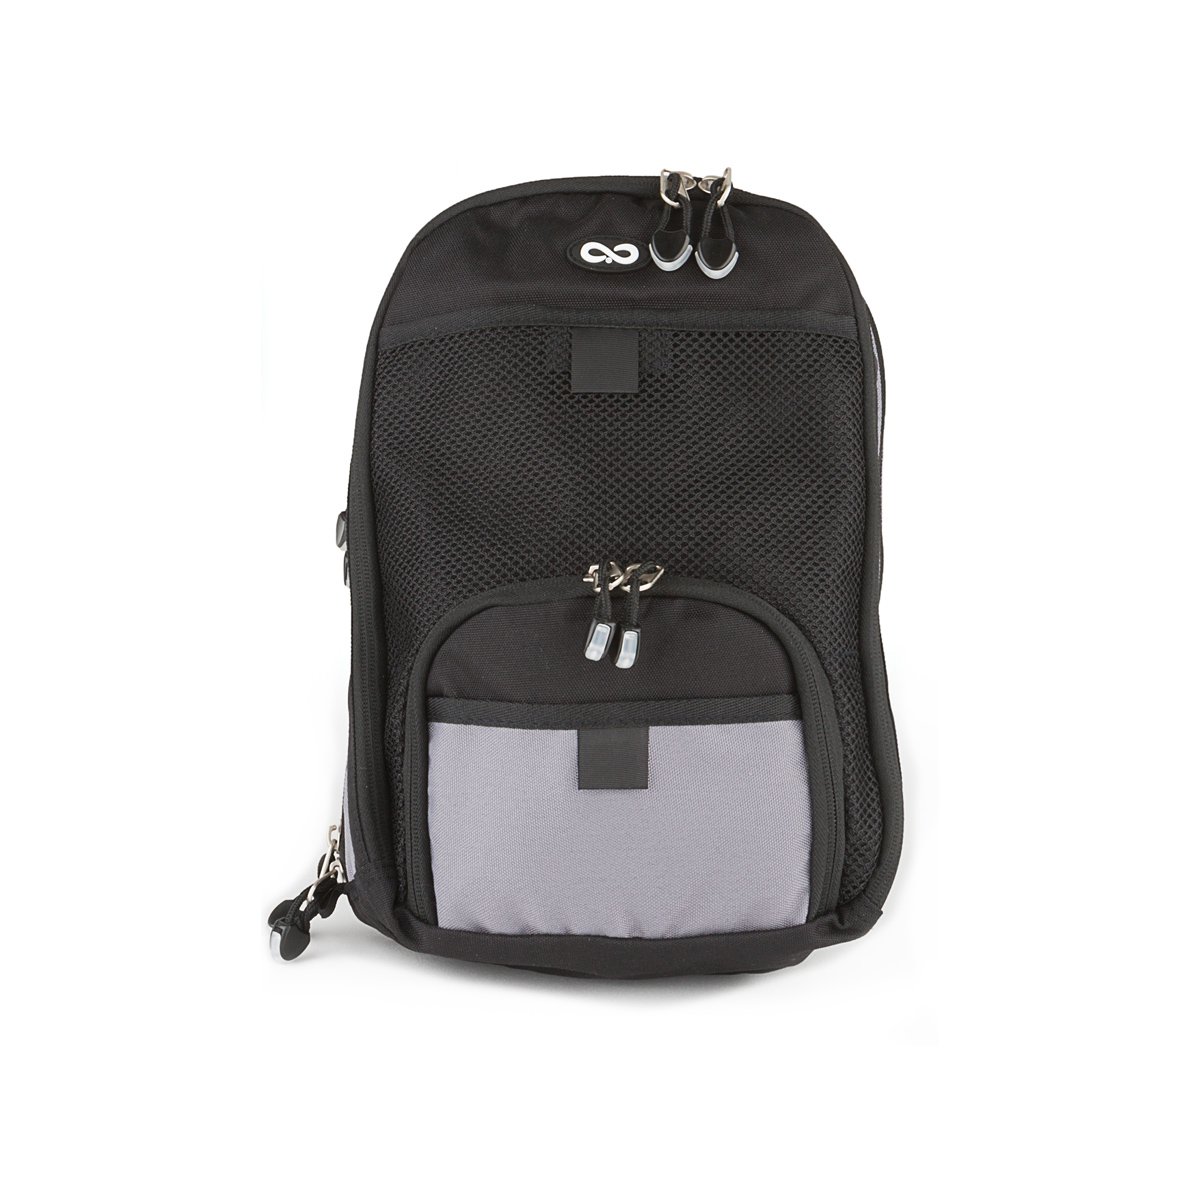 Picture of Zevex 13004600 Infinity Black Backpack